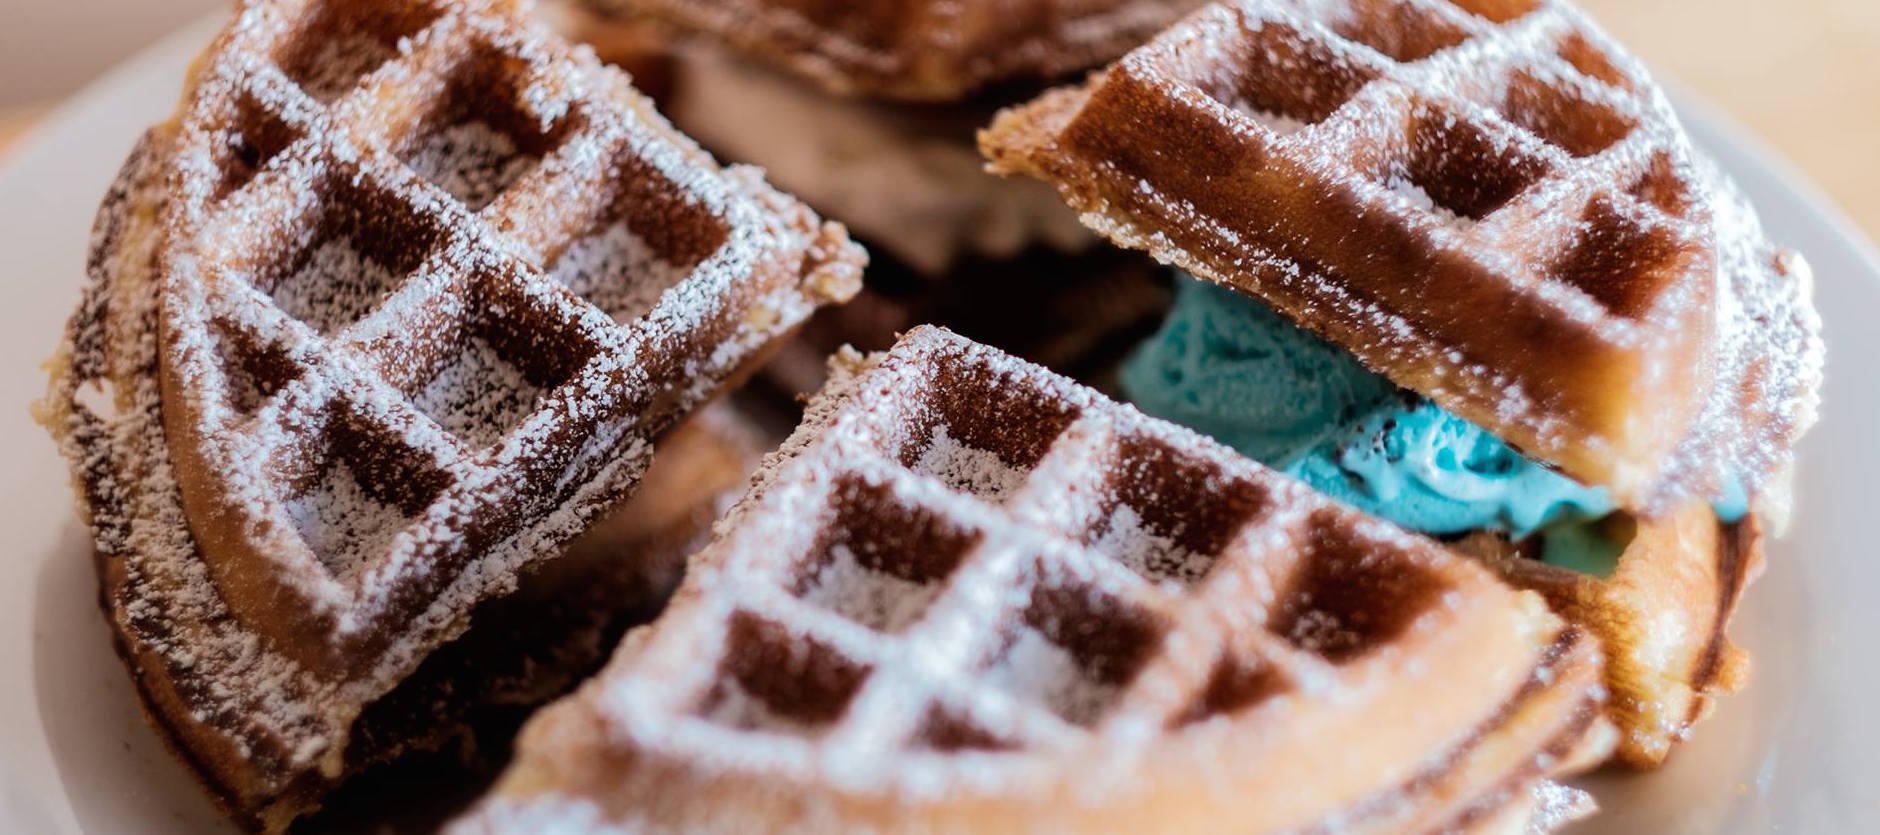 Plenty in the news the past two weeks: waffles & ice cream, more